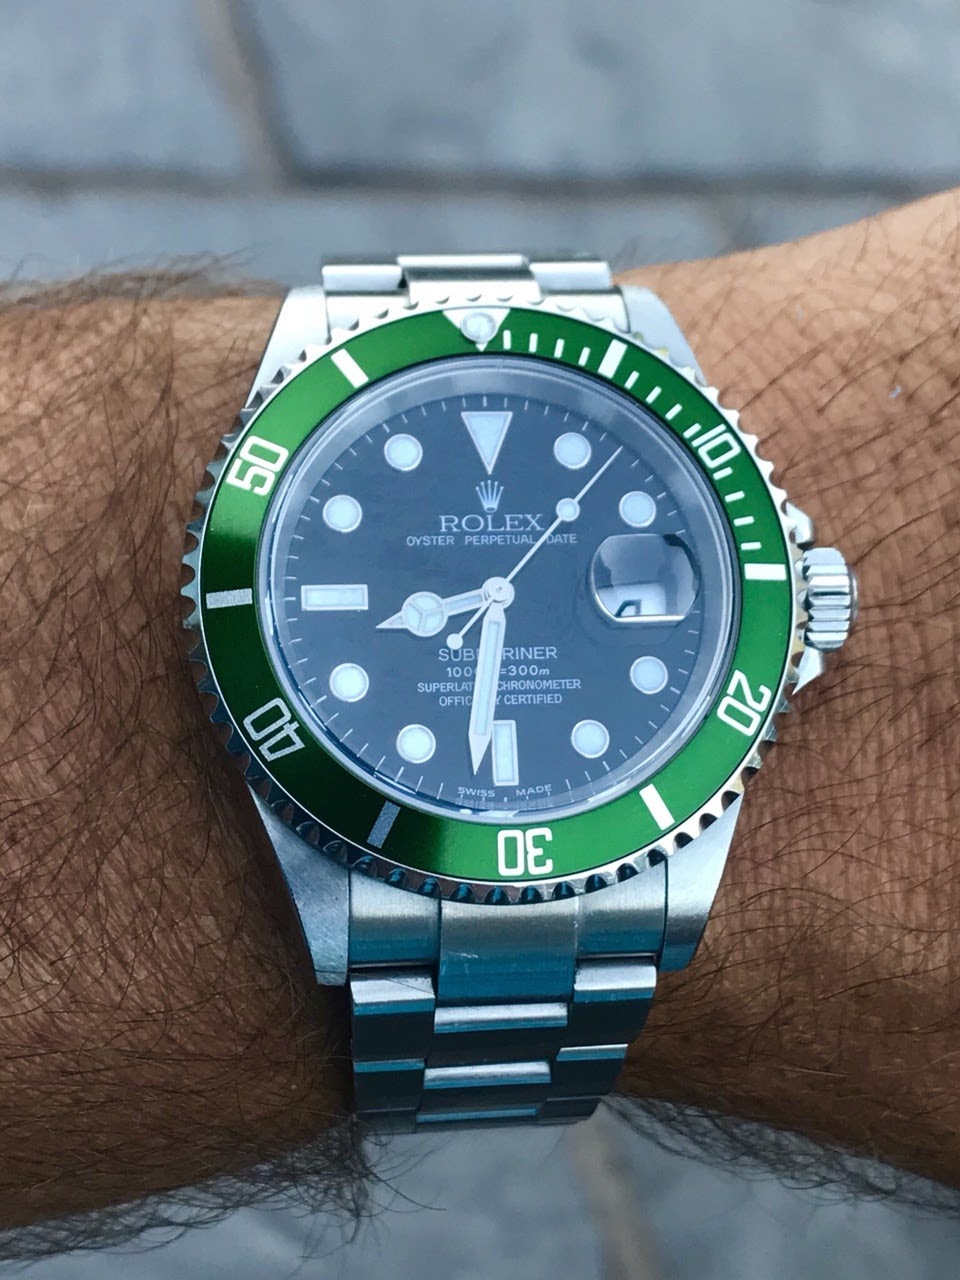 Identifying future classic Rolex from 